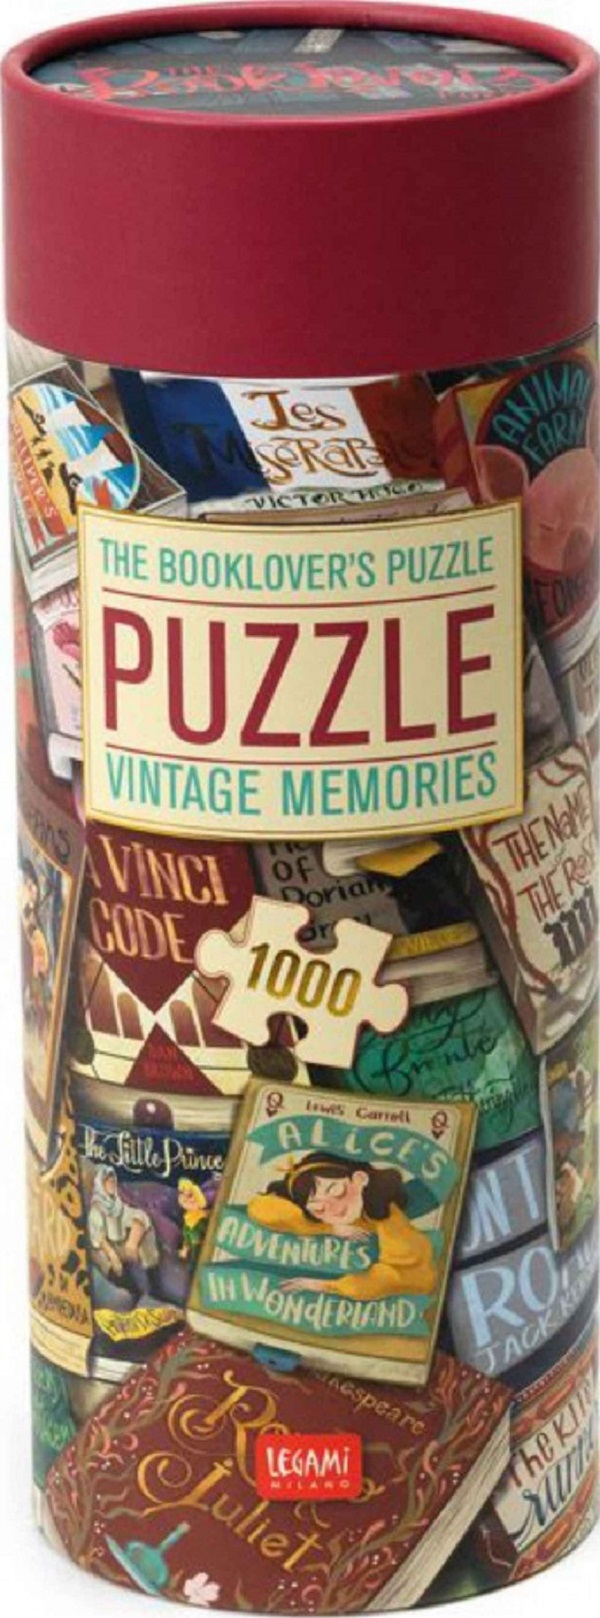 Puzzle 1000: Book Lover